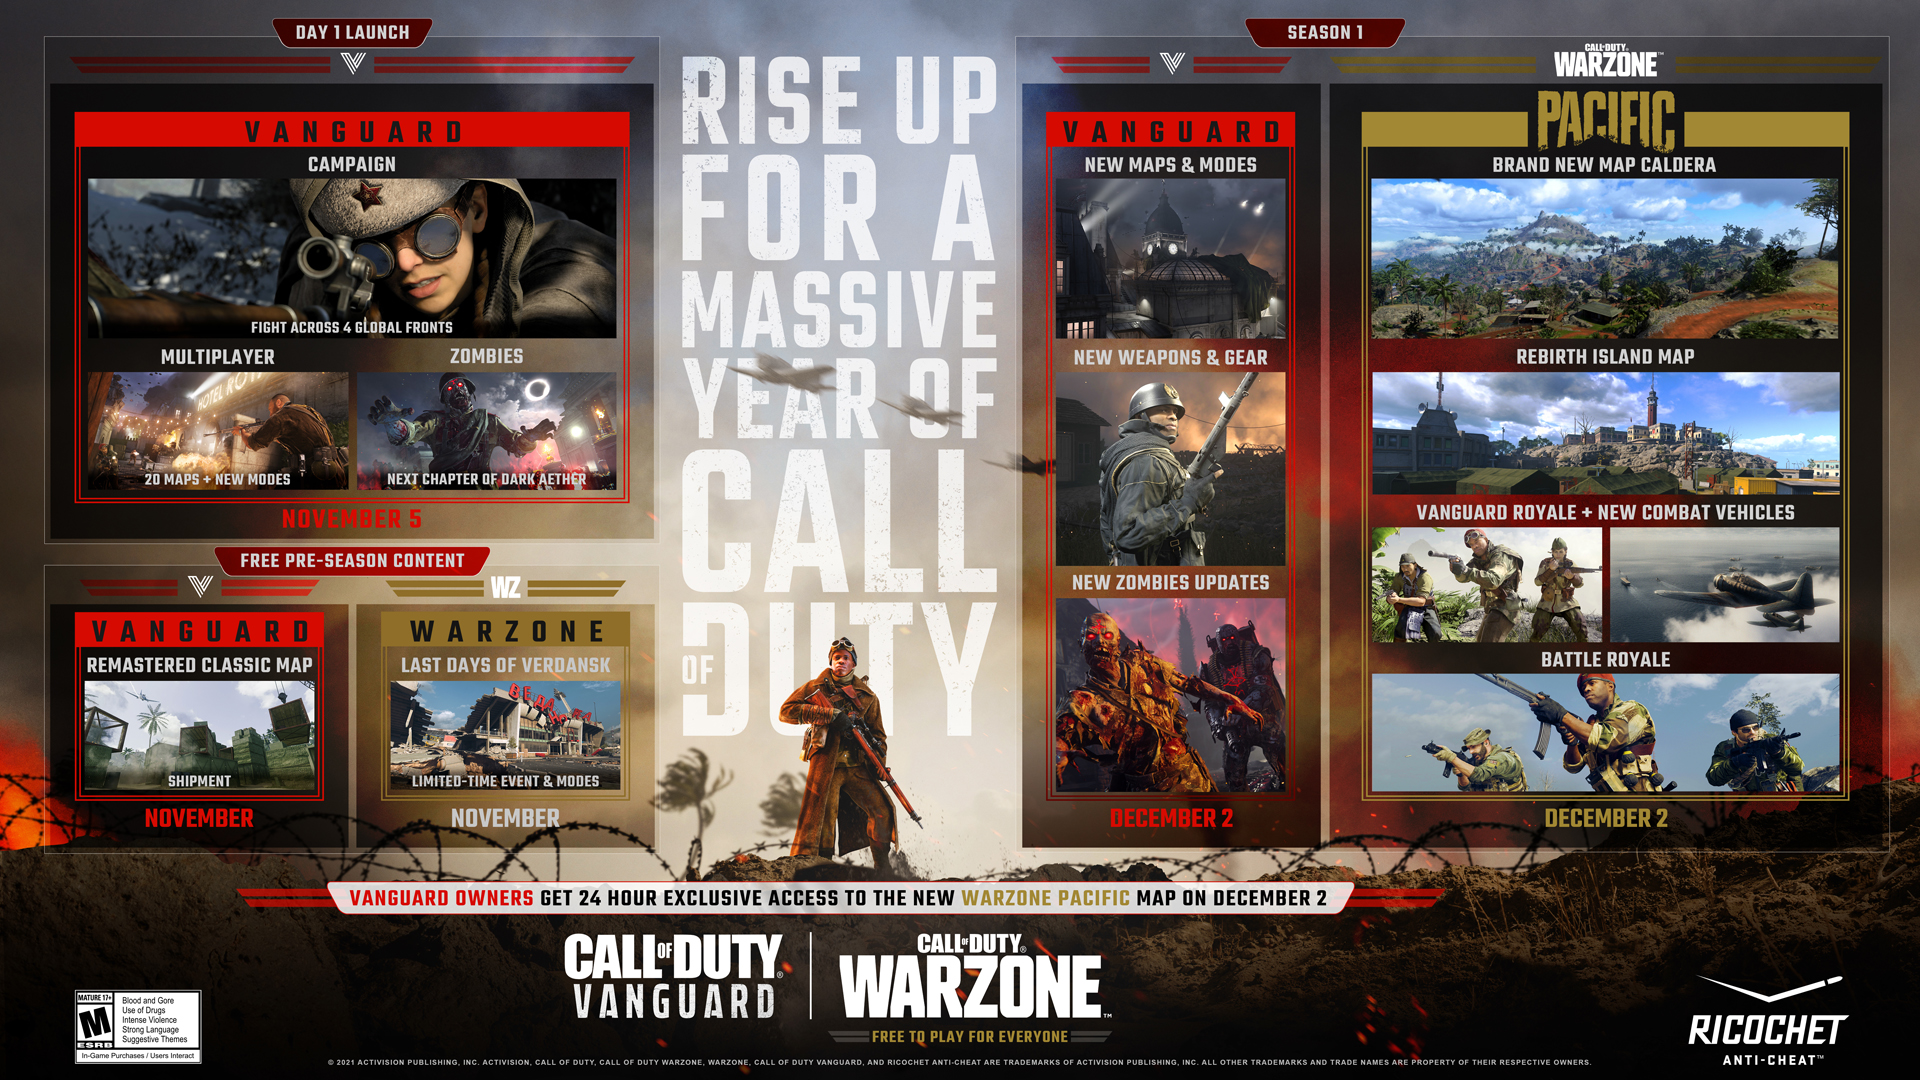 Call of Duty Vanguard Zombies: Story, Characters, Maps, Modes, and Gameplay